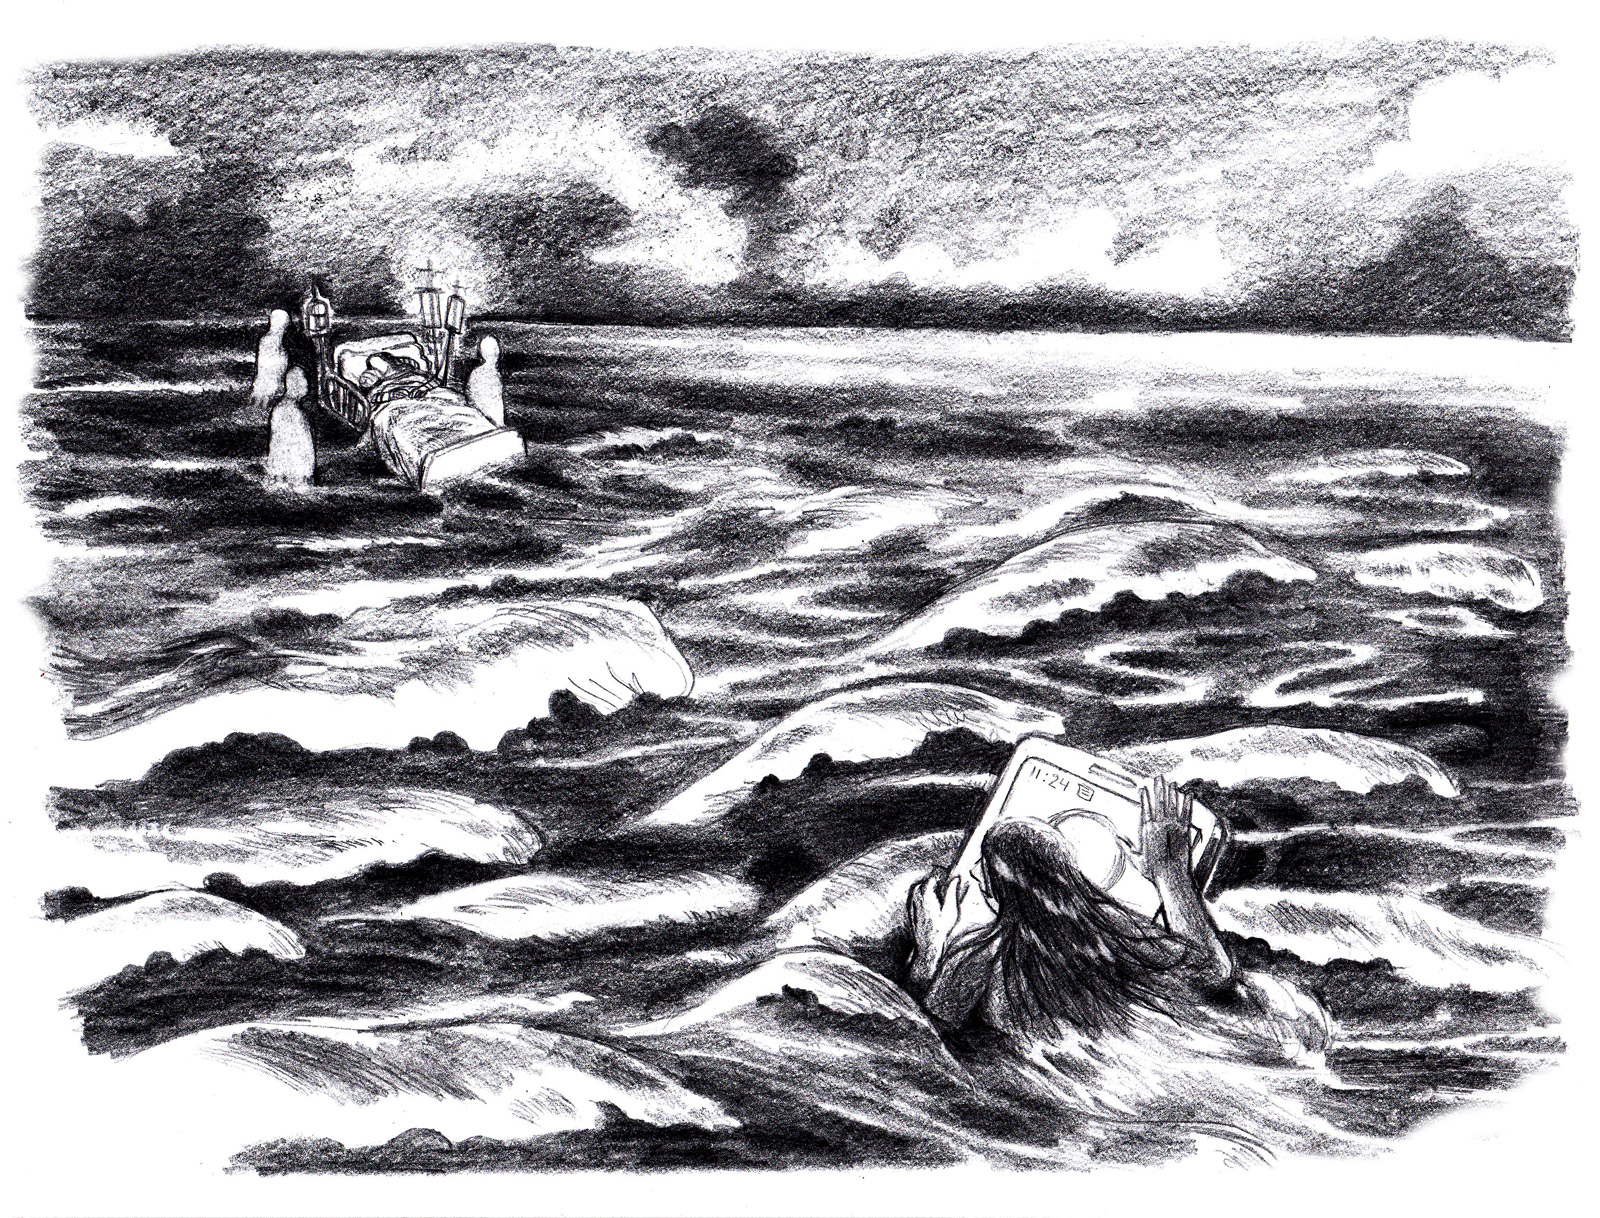 In a stormy sea, tossed by waves, a woman clings to a mobile phone to stay afloat. In the distance there is a hospital bed surrounded by nurses. Her grandmother lays on the bed. She is too far away to be reached.